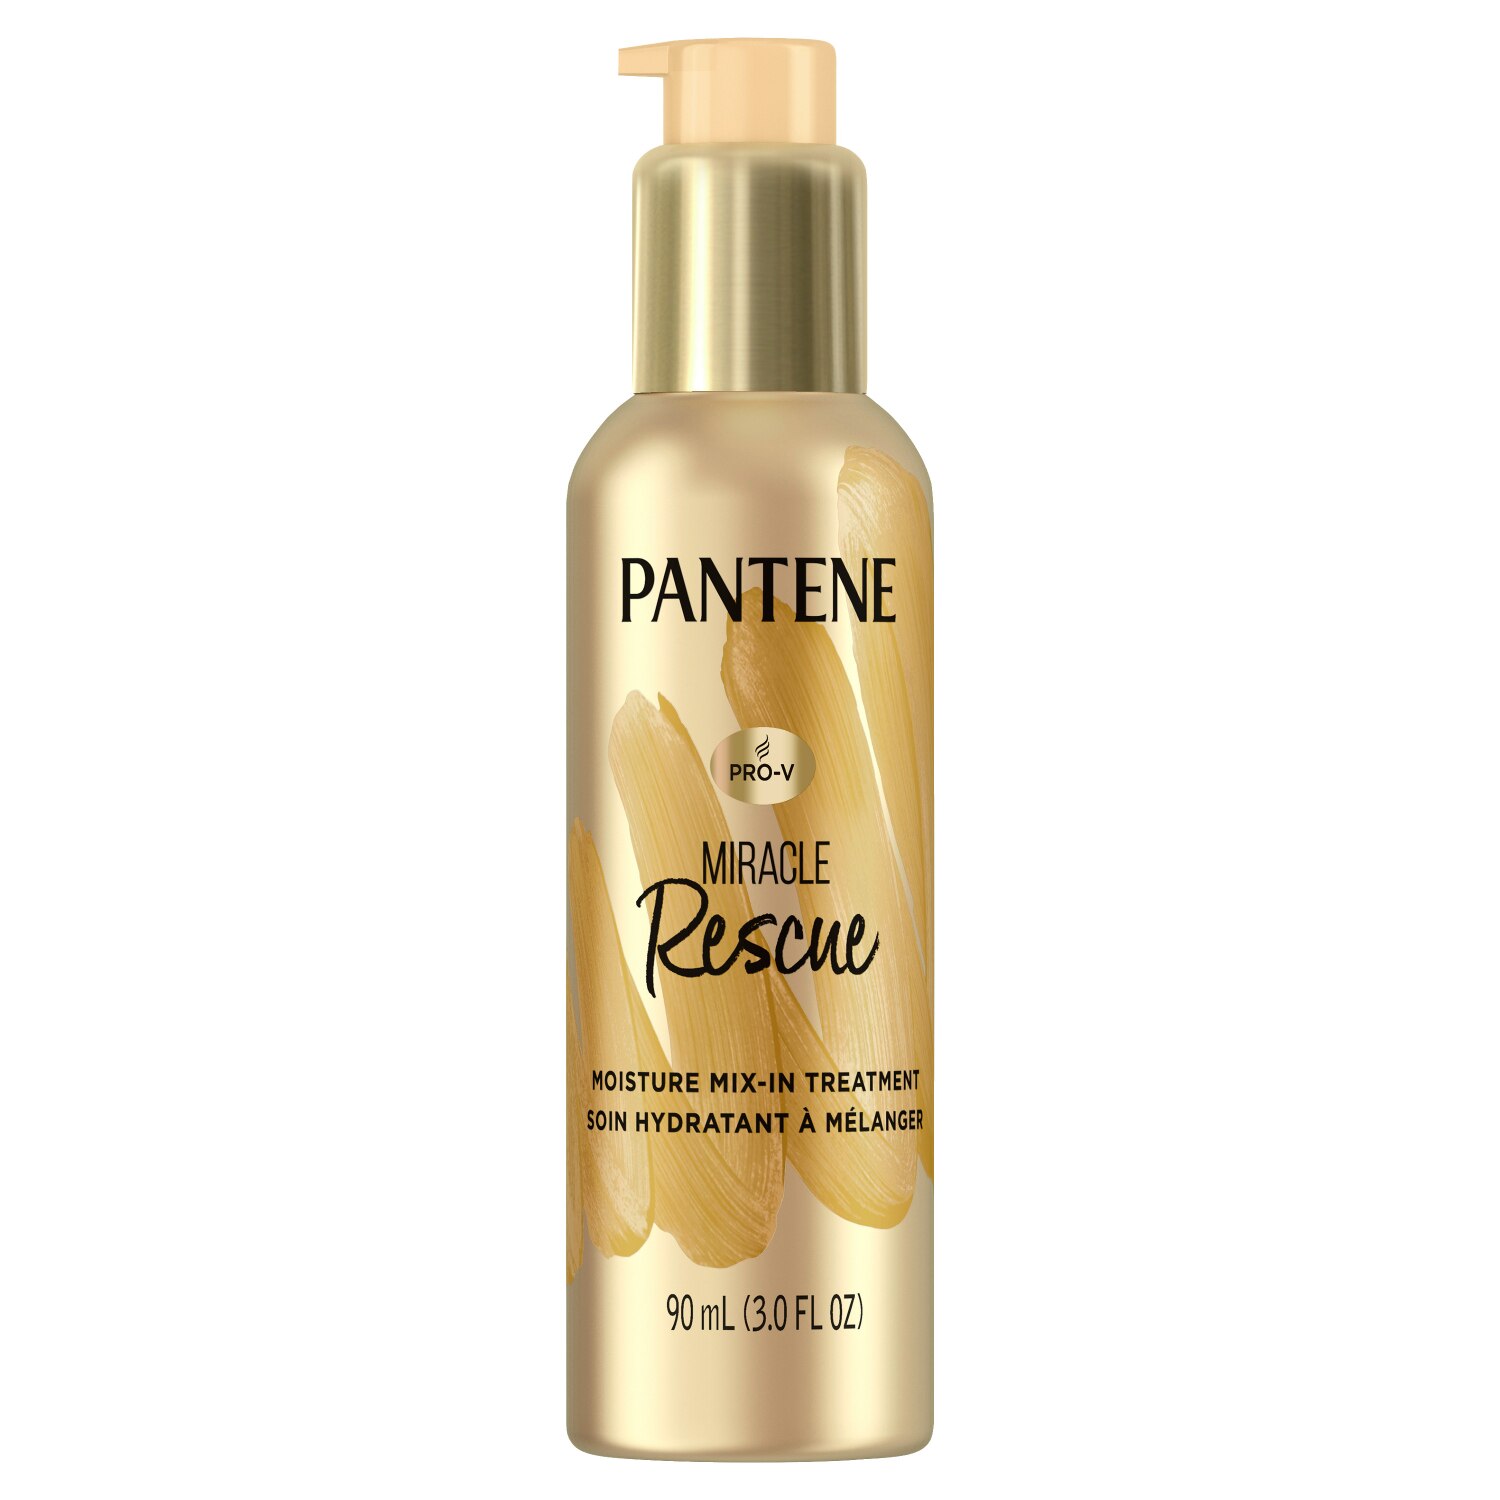 Pantene Miracle Rescue Moisture Mix-In, Damaged Hair Repair Conditioner Add-In, 3.2 OZ